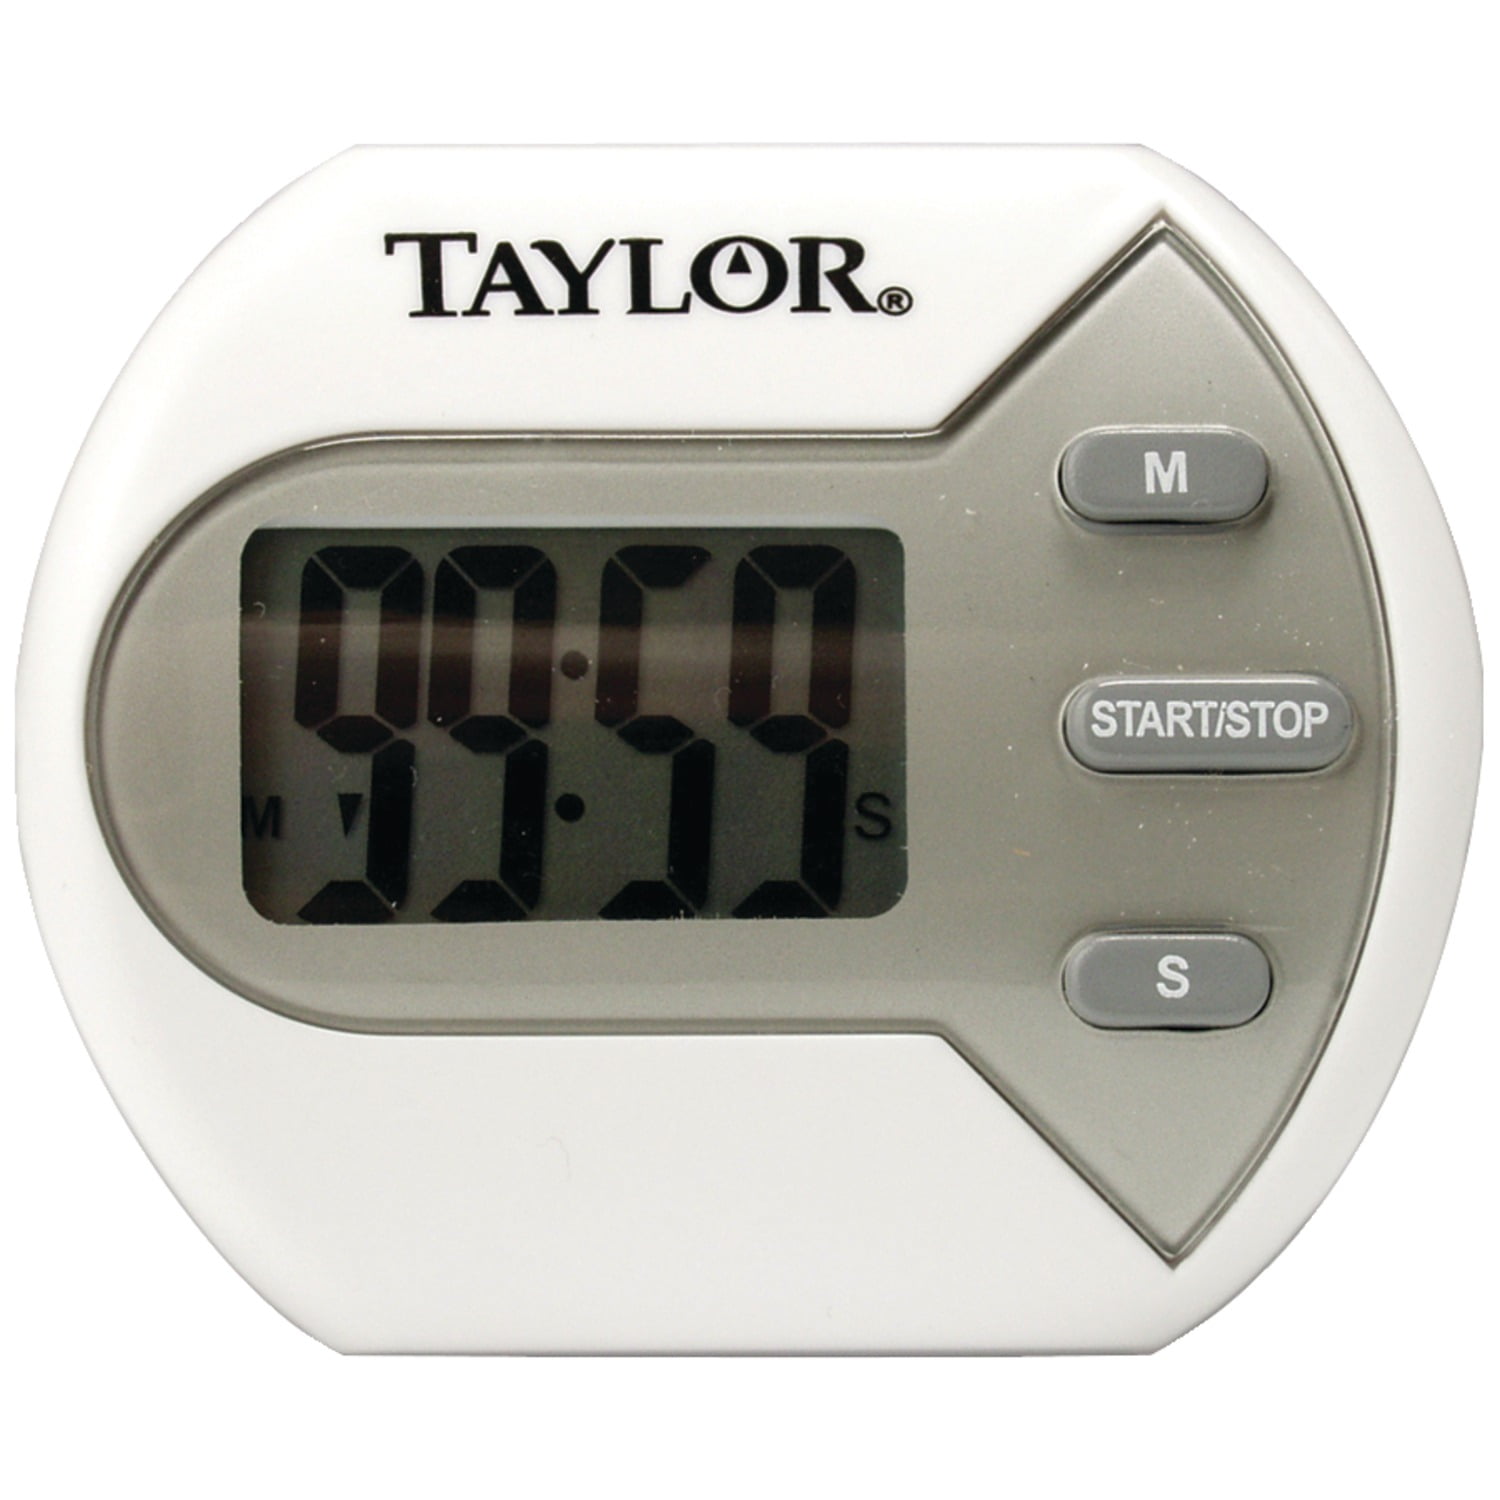 clip magnet stand 5806 digital battery operated NEW COMPACT TIMER Taylor